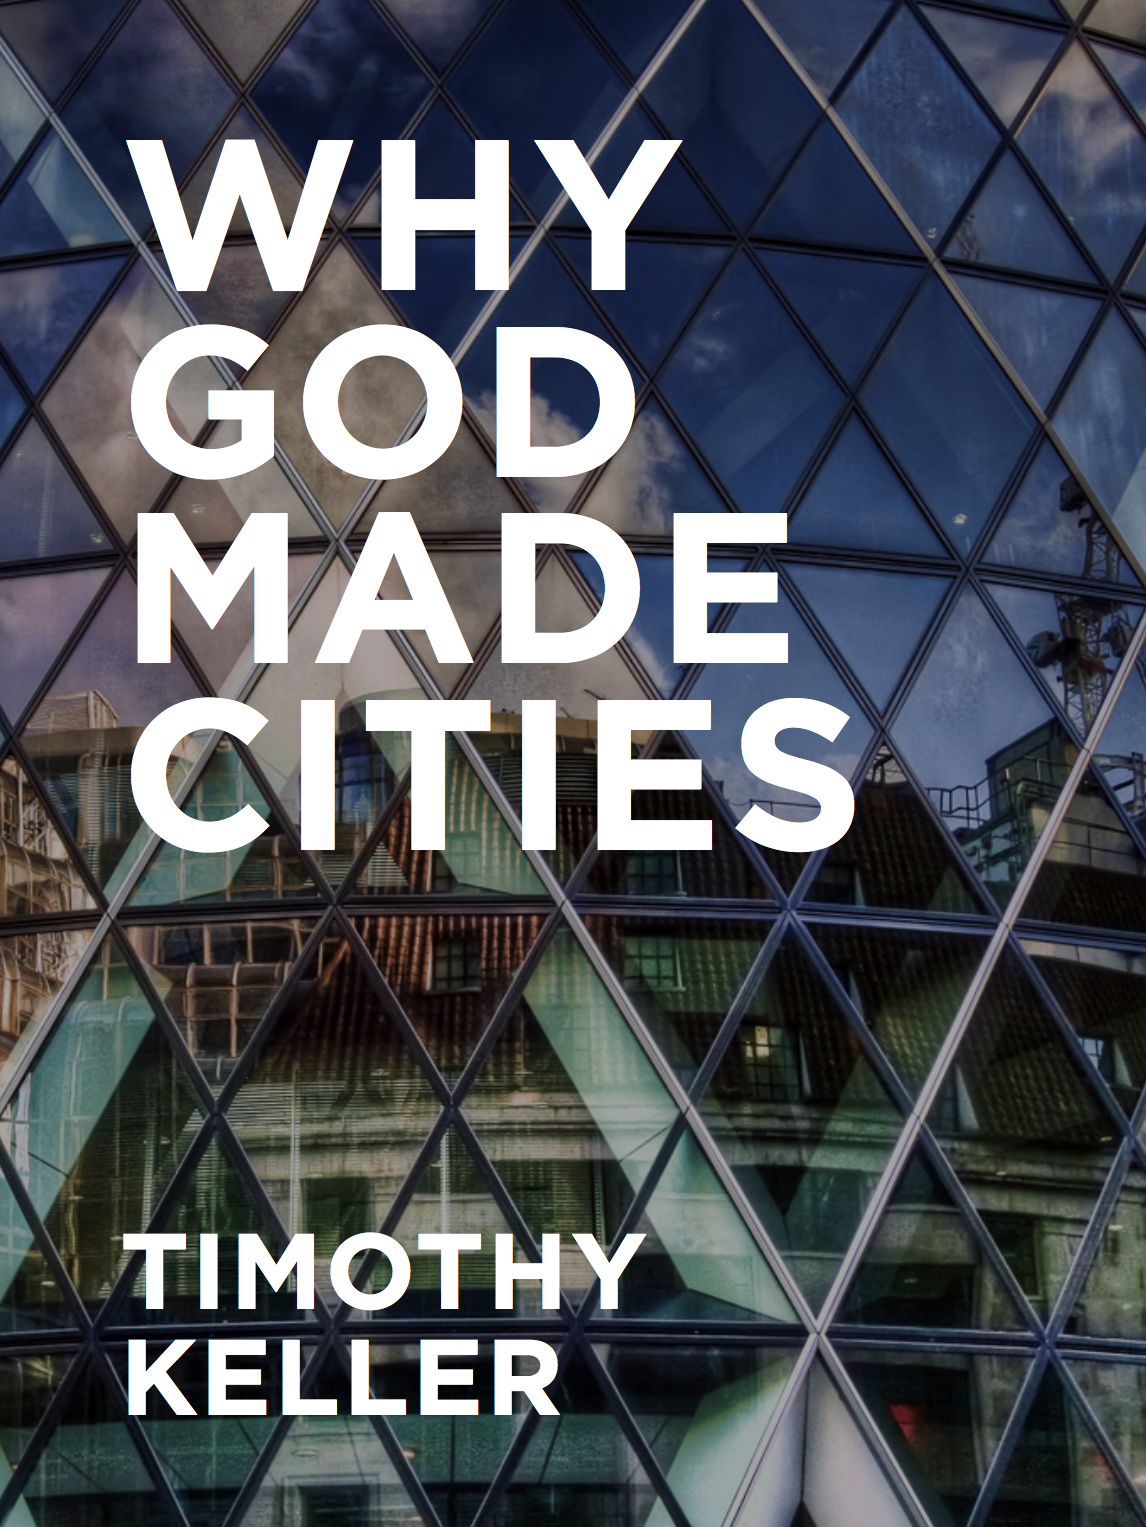 Free eBook from Timothy Keller Why God Made Cities CrossPoints